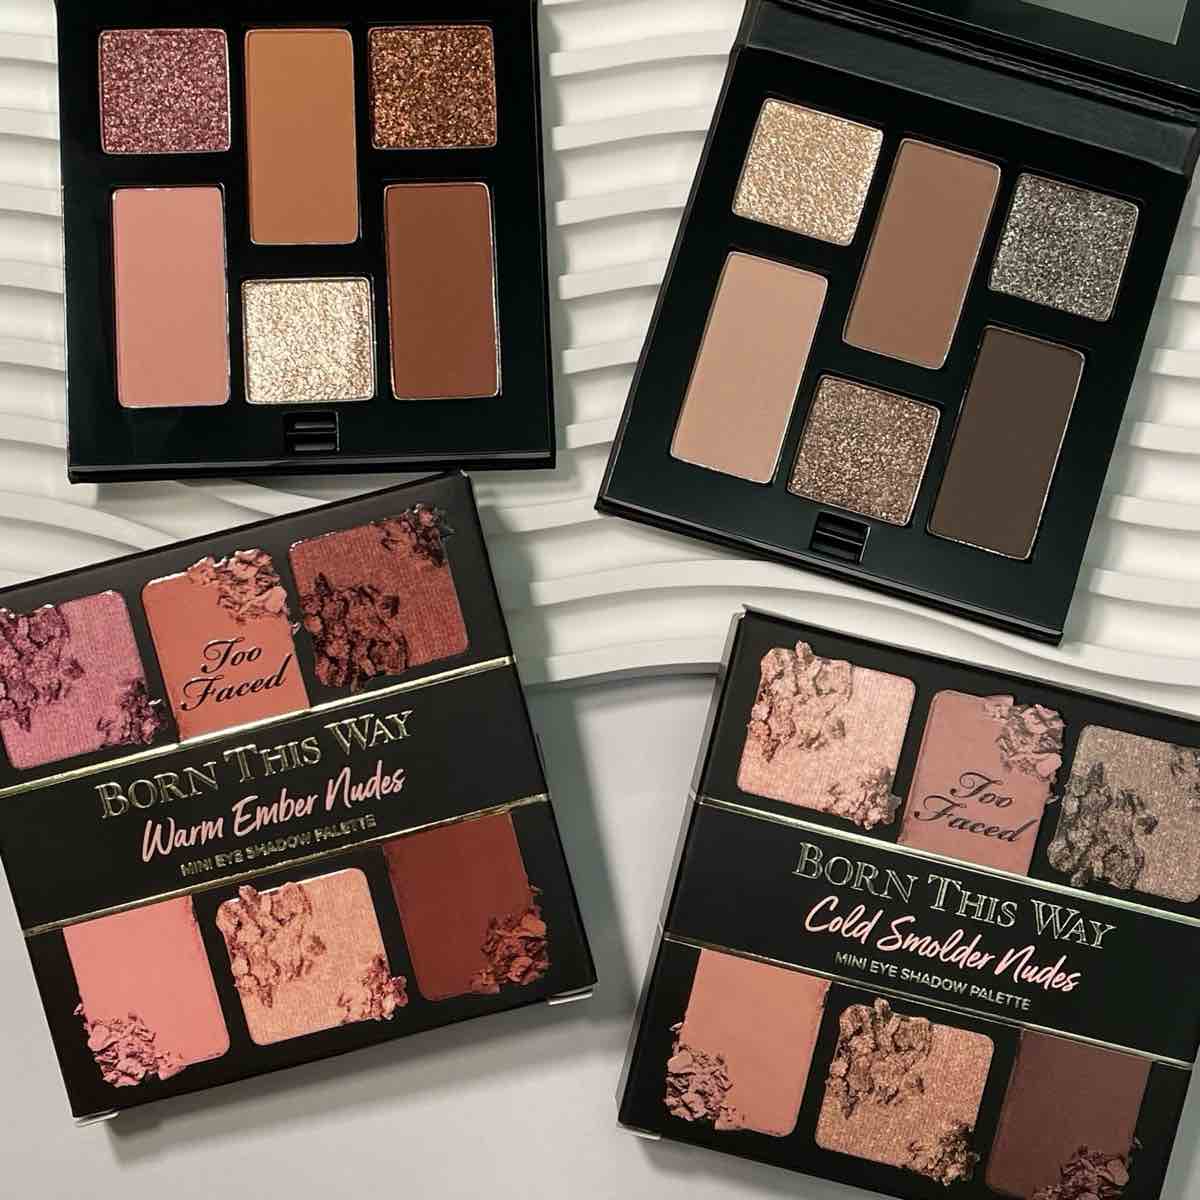 Mini Palette Nude Too Faced Born This Way